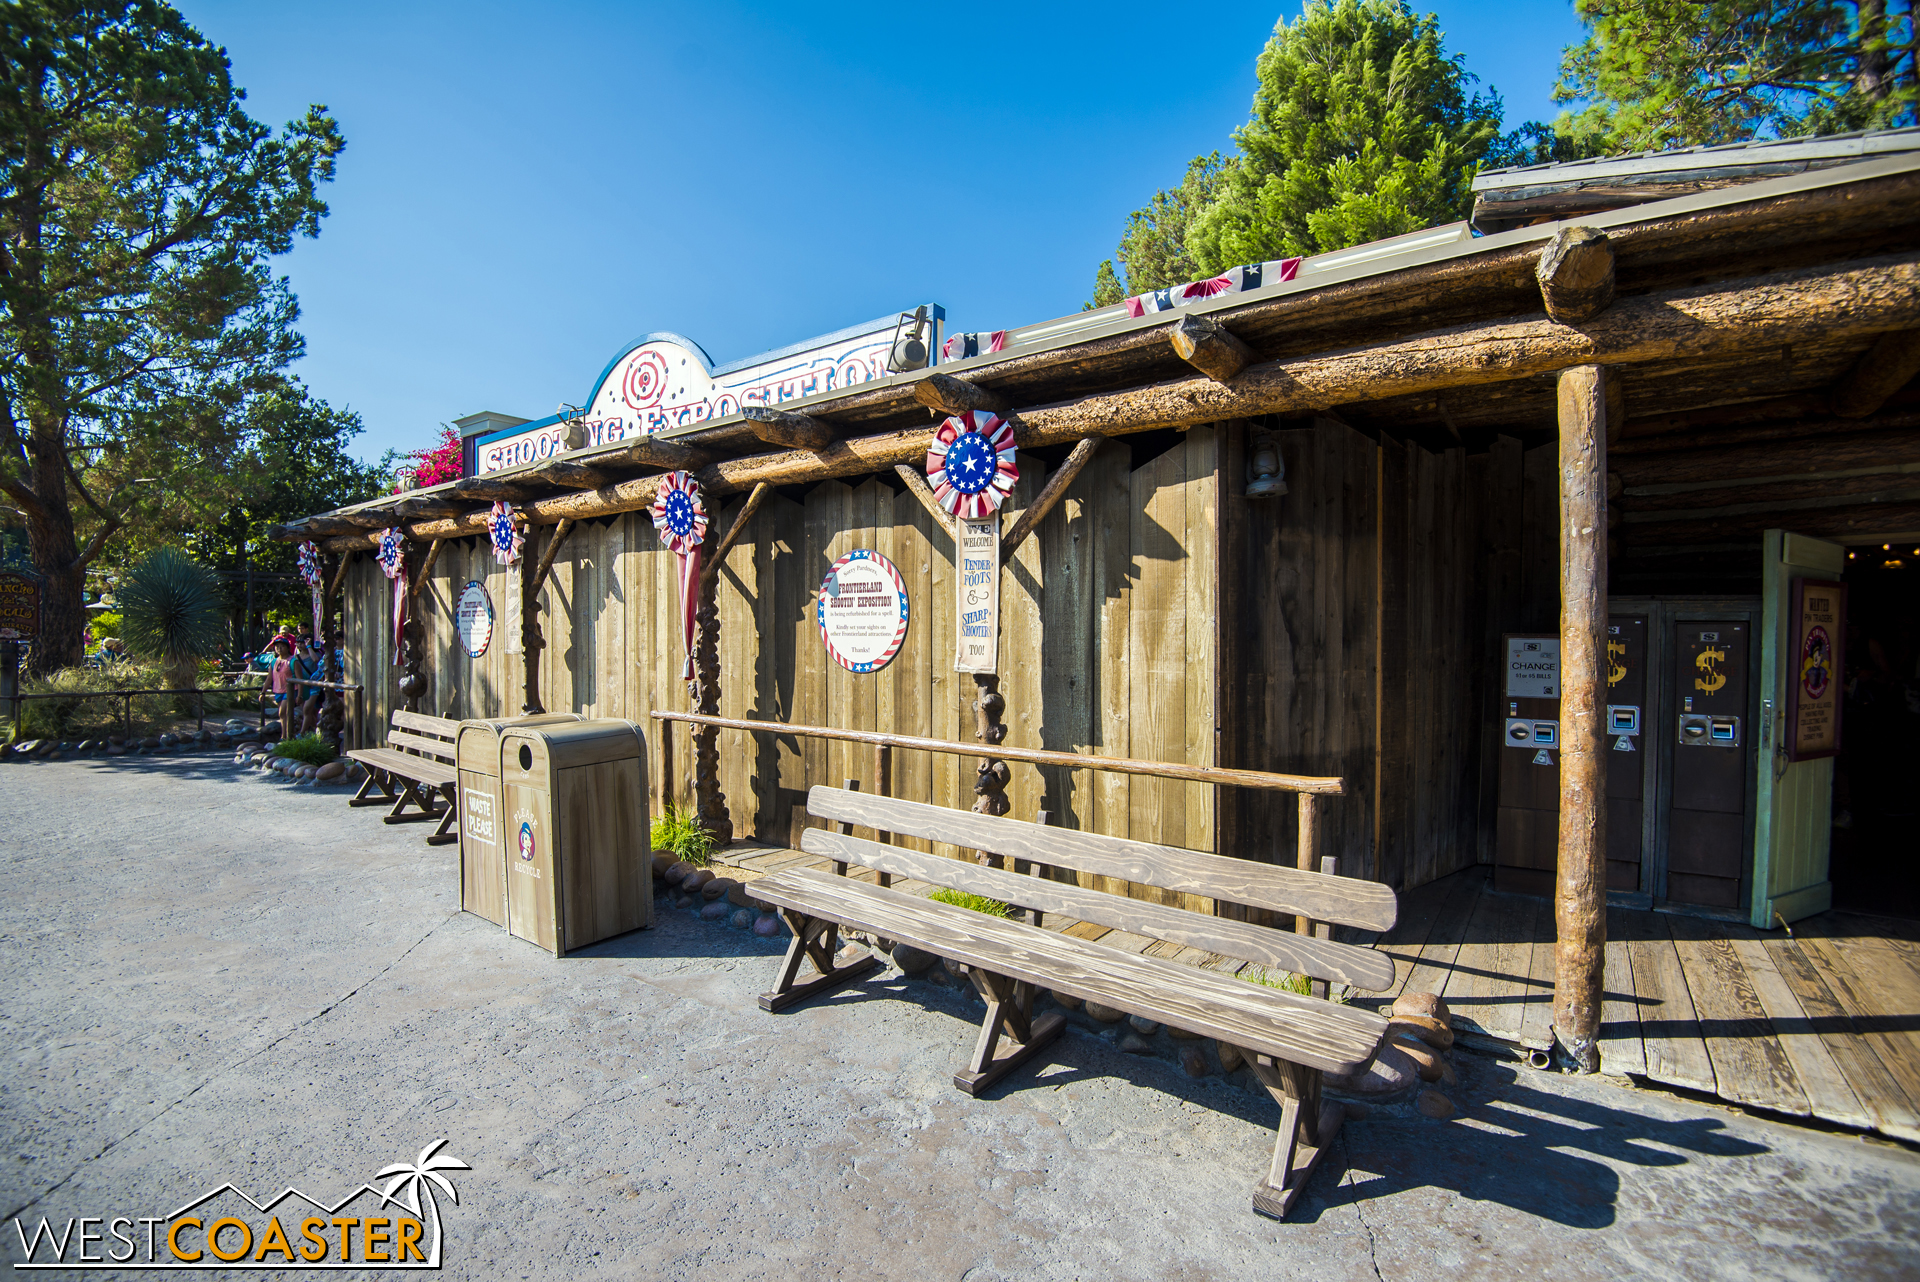  The Frontierland Shooting Gallery is currently closed for refurbishment. 